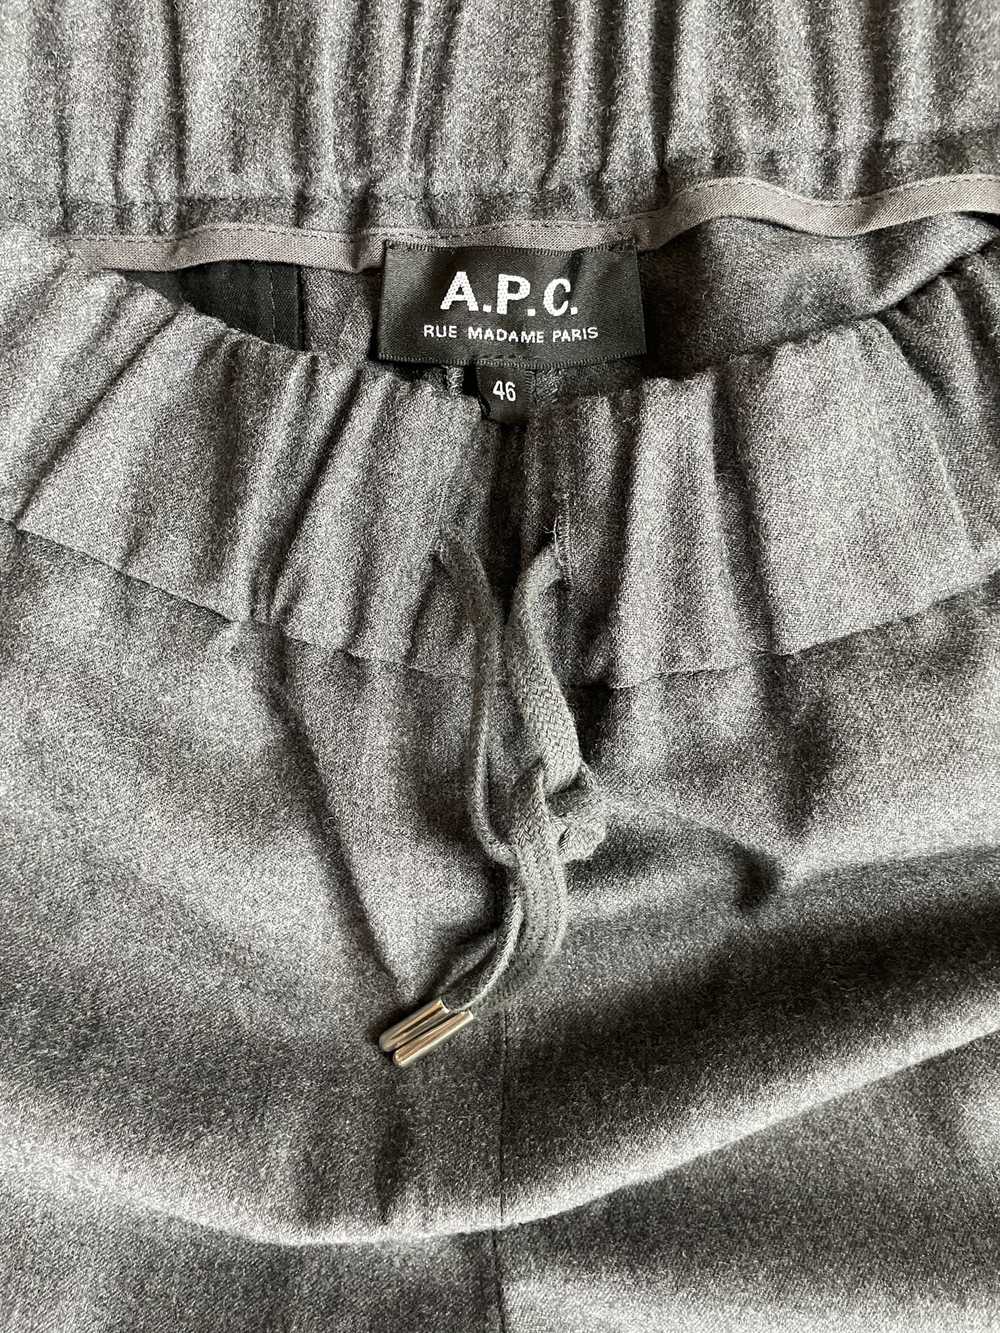 A.P.C. Virgin Wool Cropped Trousers - image 4